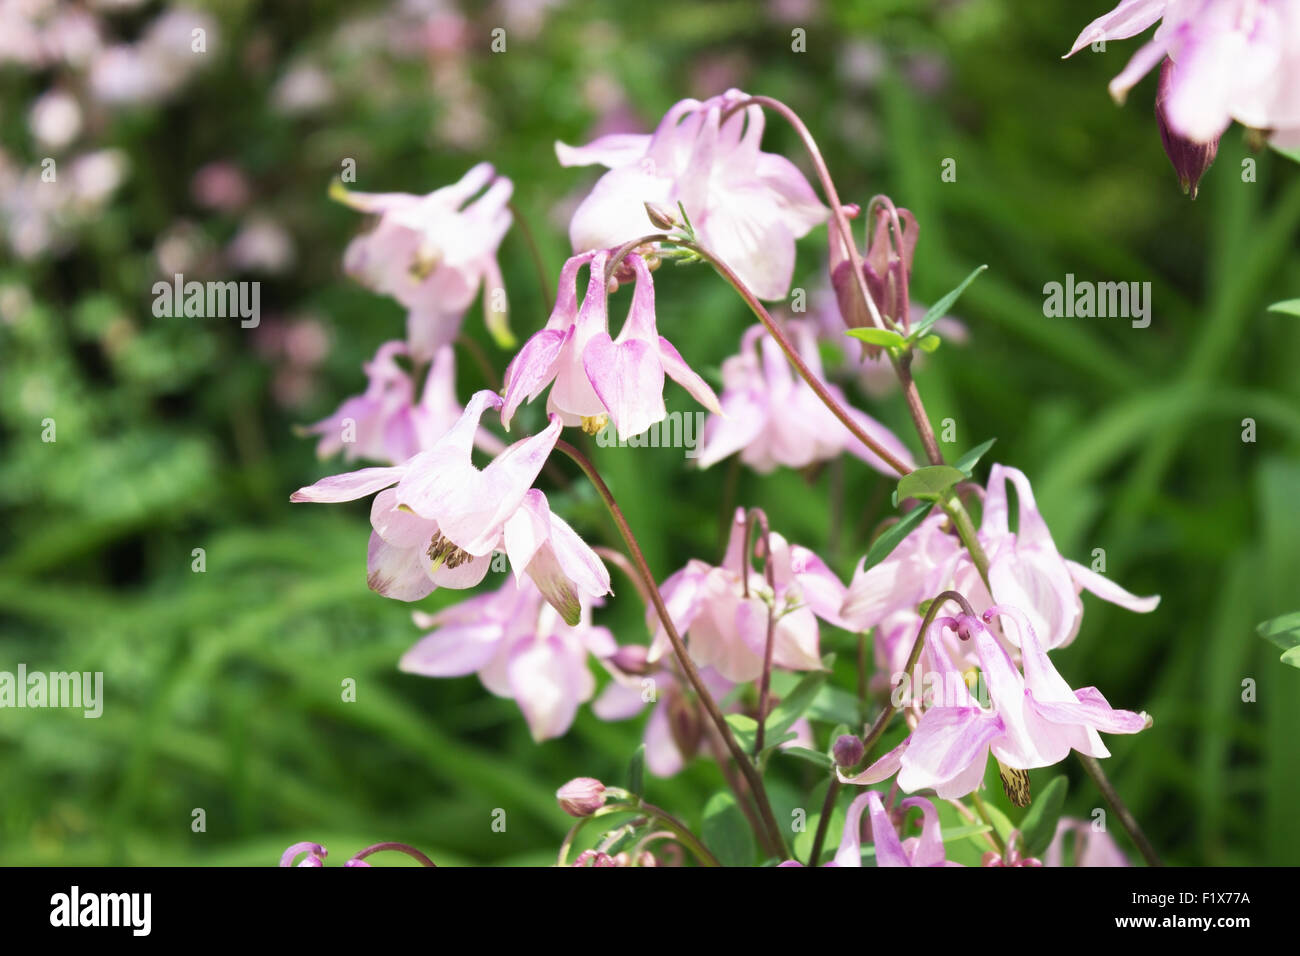 Colored Columbine Flowers on the flowerbed. Stock Photo